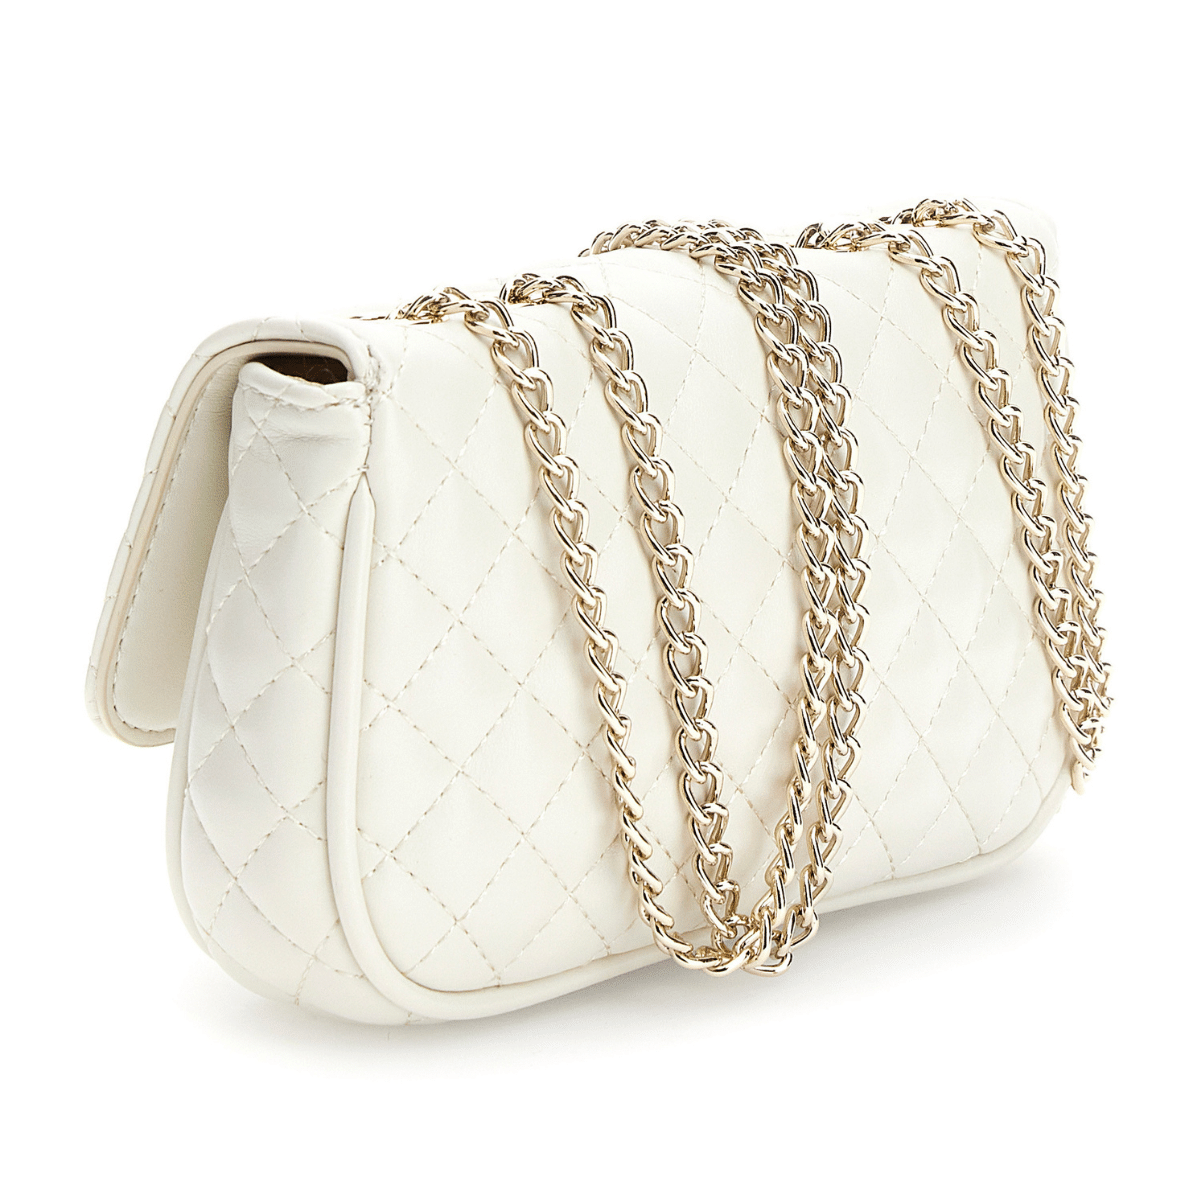 Guess girls cream handbag with gold chain strap back view